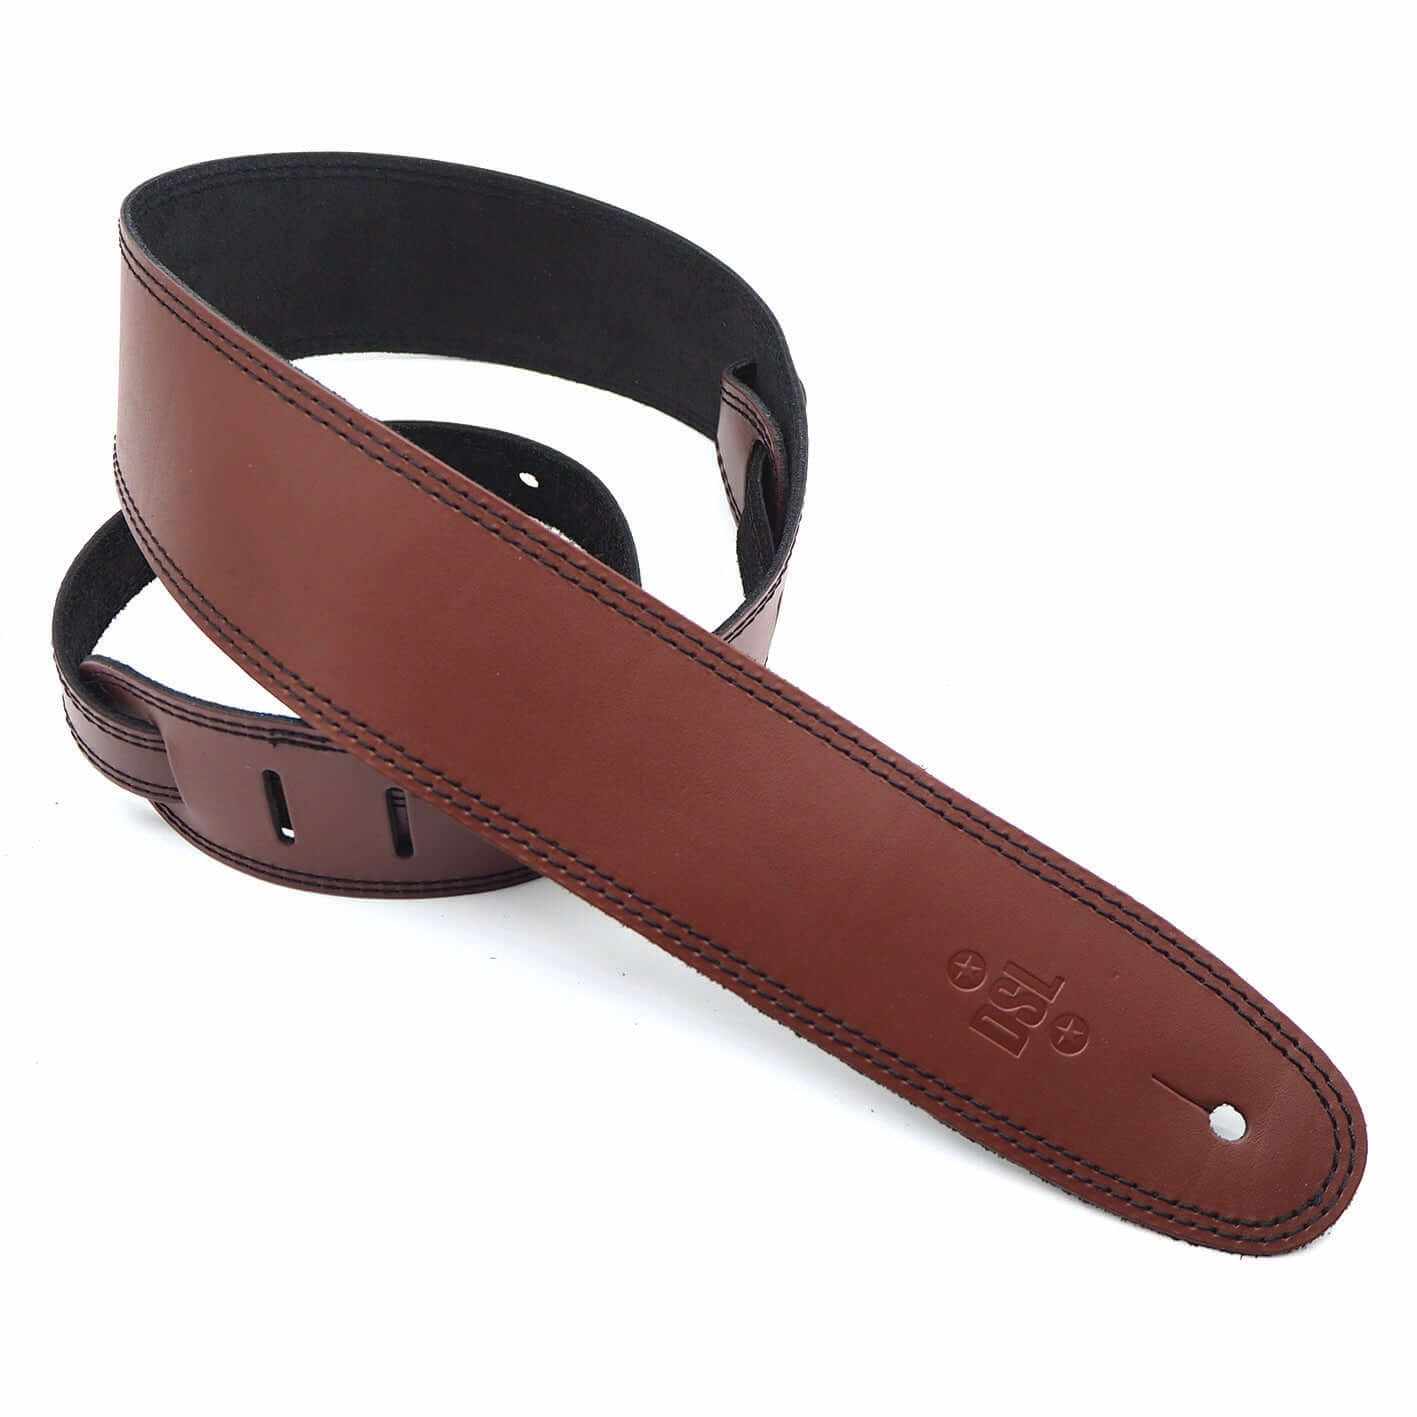 Dsl Sge Guitar Strap 2.5 Inch Wide Tan Leather With Black Stitch - MusicStreet